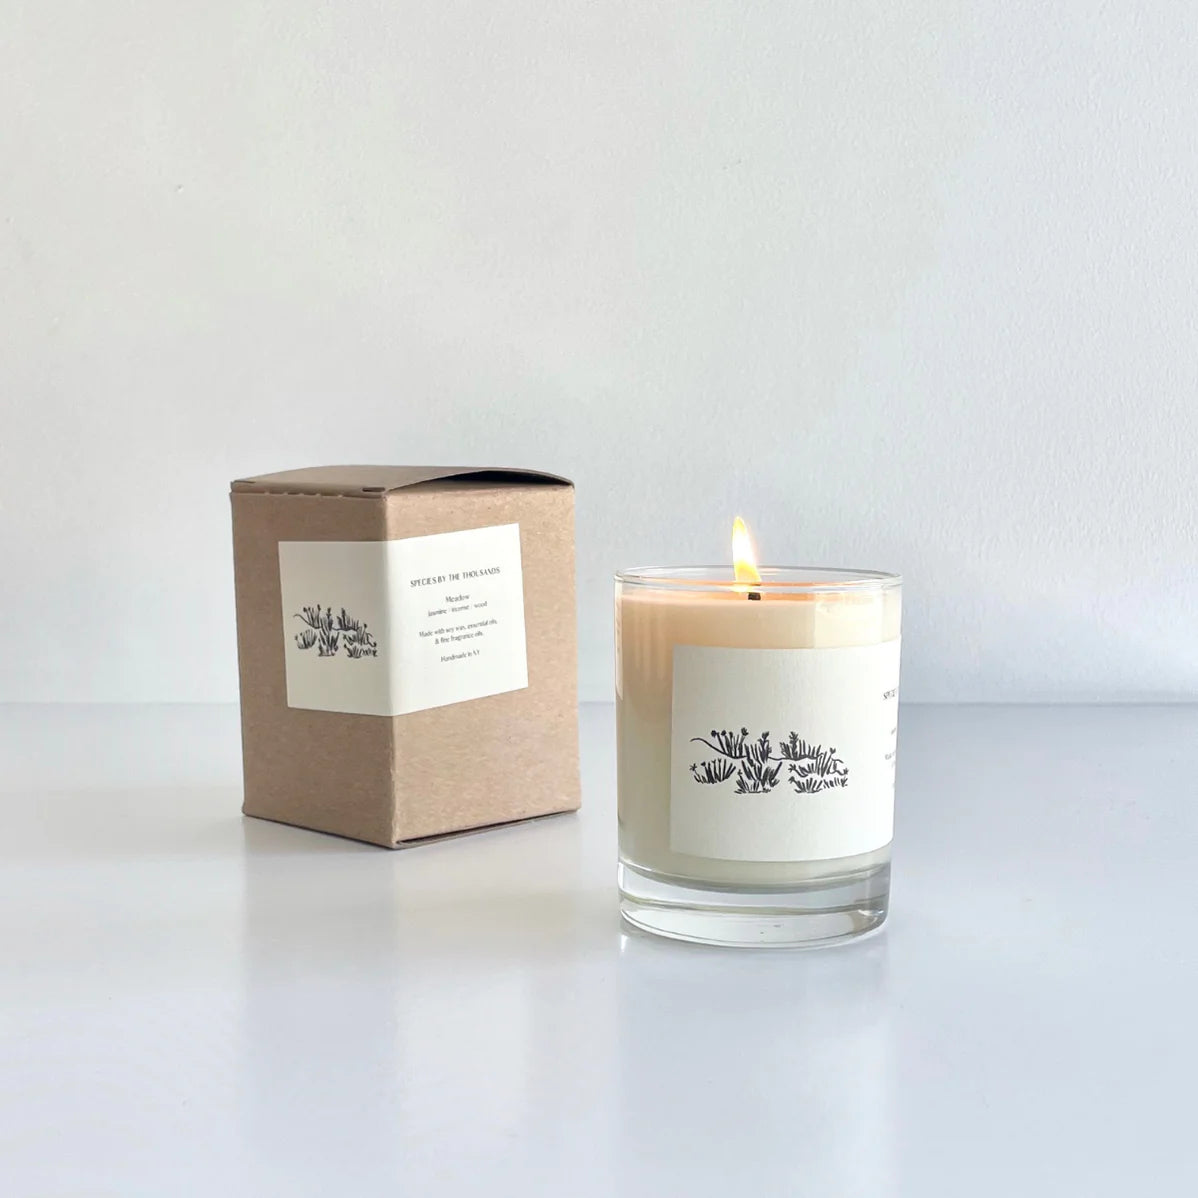 species by the thousands meadow candle / This hand poured candle expresses the wild floral wonder of untamed rolling meadows, with a blend of jasmine, incense & wood